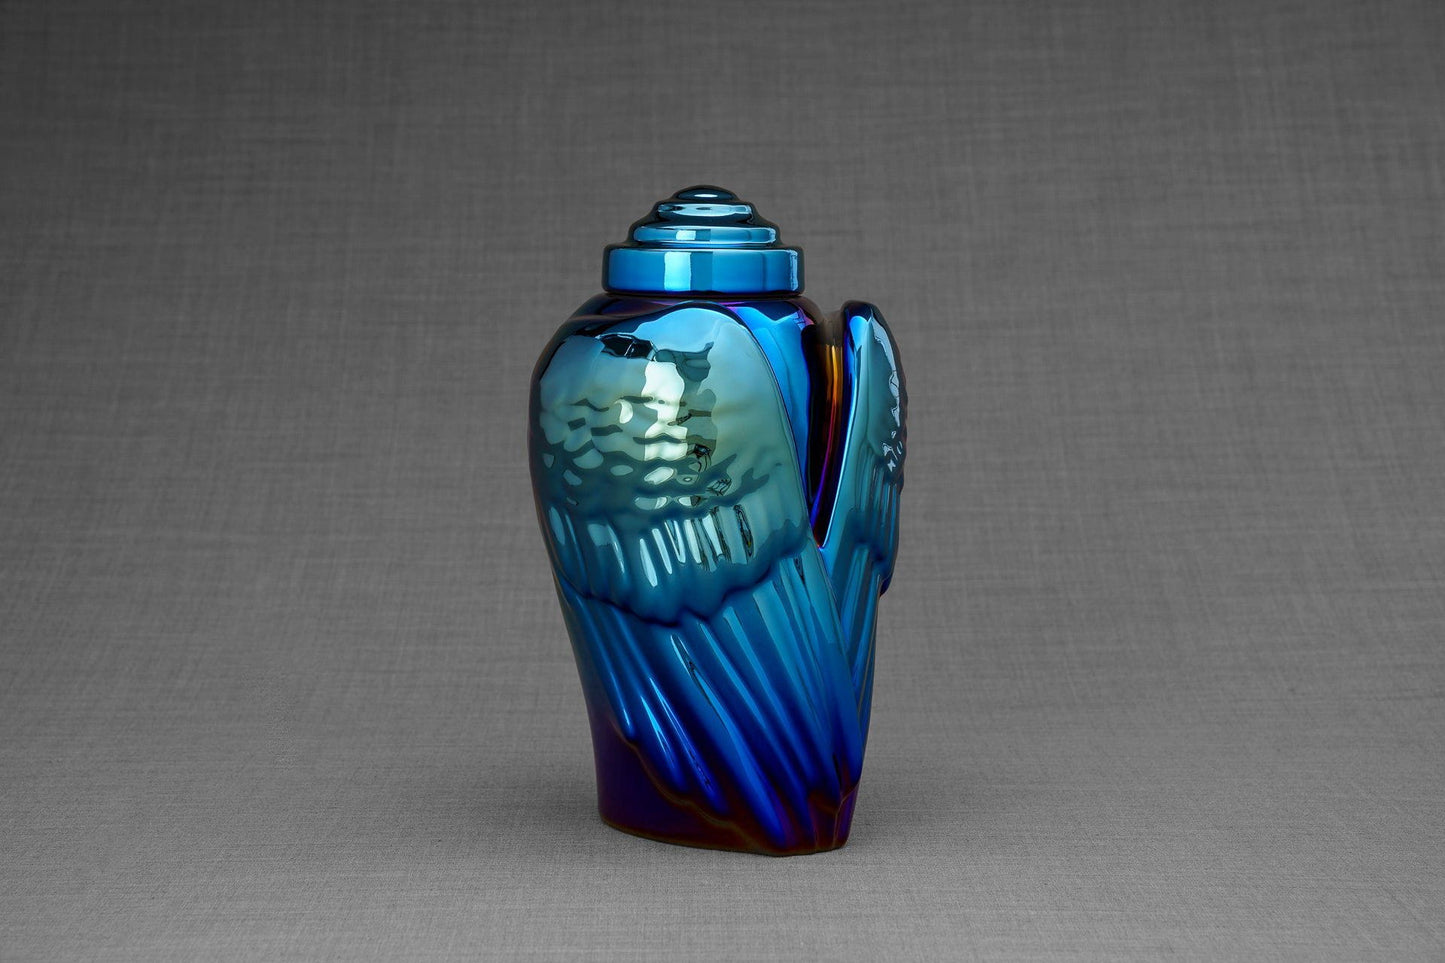 Pulvis Art Urns Adult Size Urn Exclusive Cremation Urn for Ashes "Wings" - Large | Glossy Blue